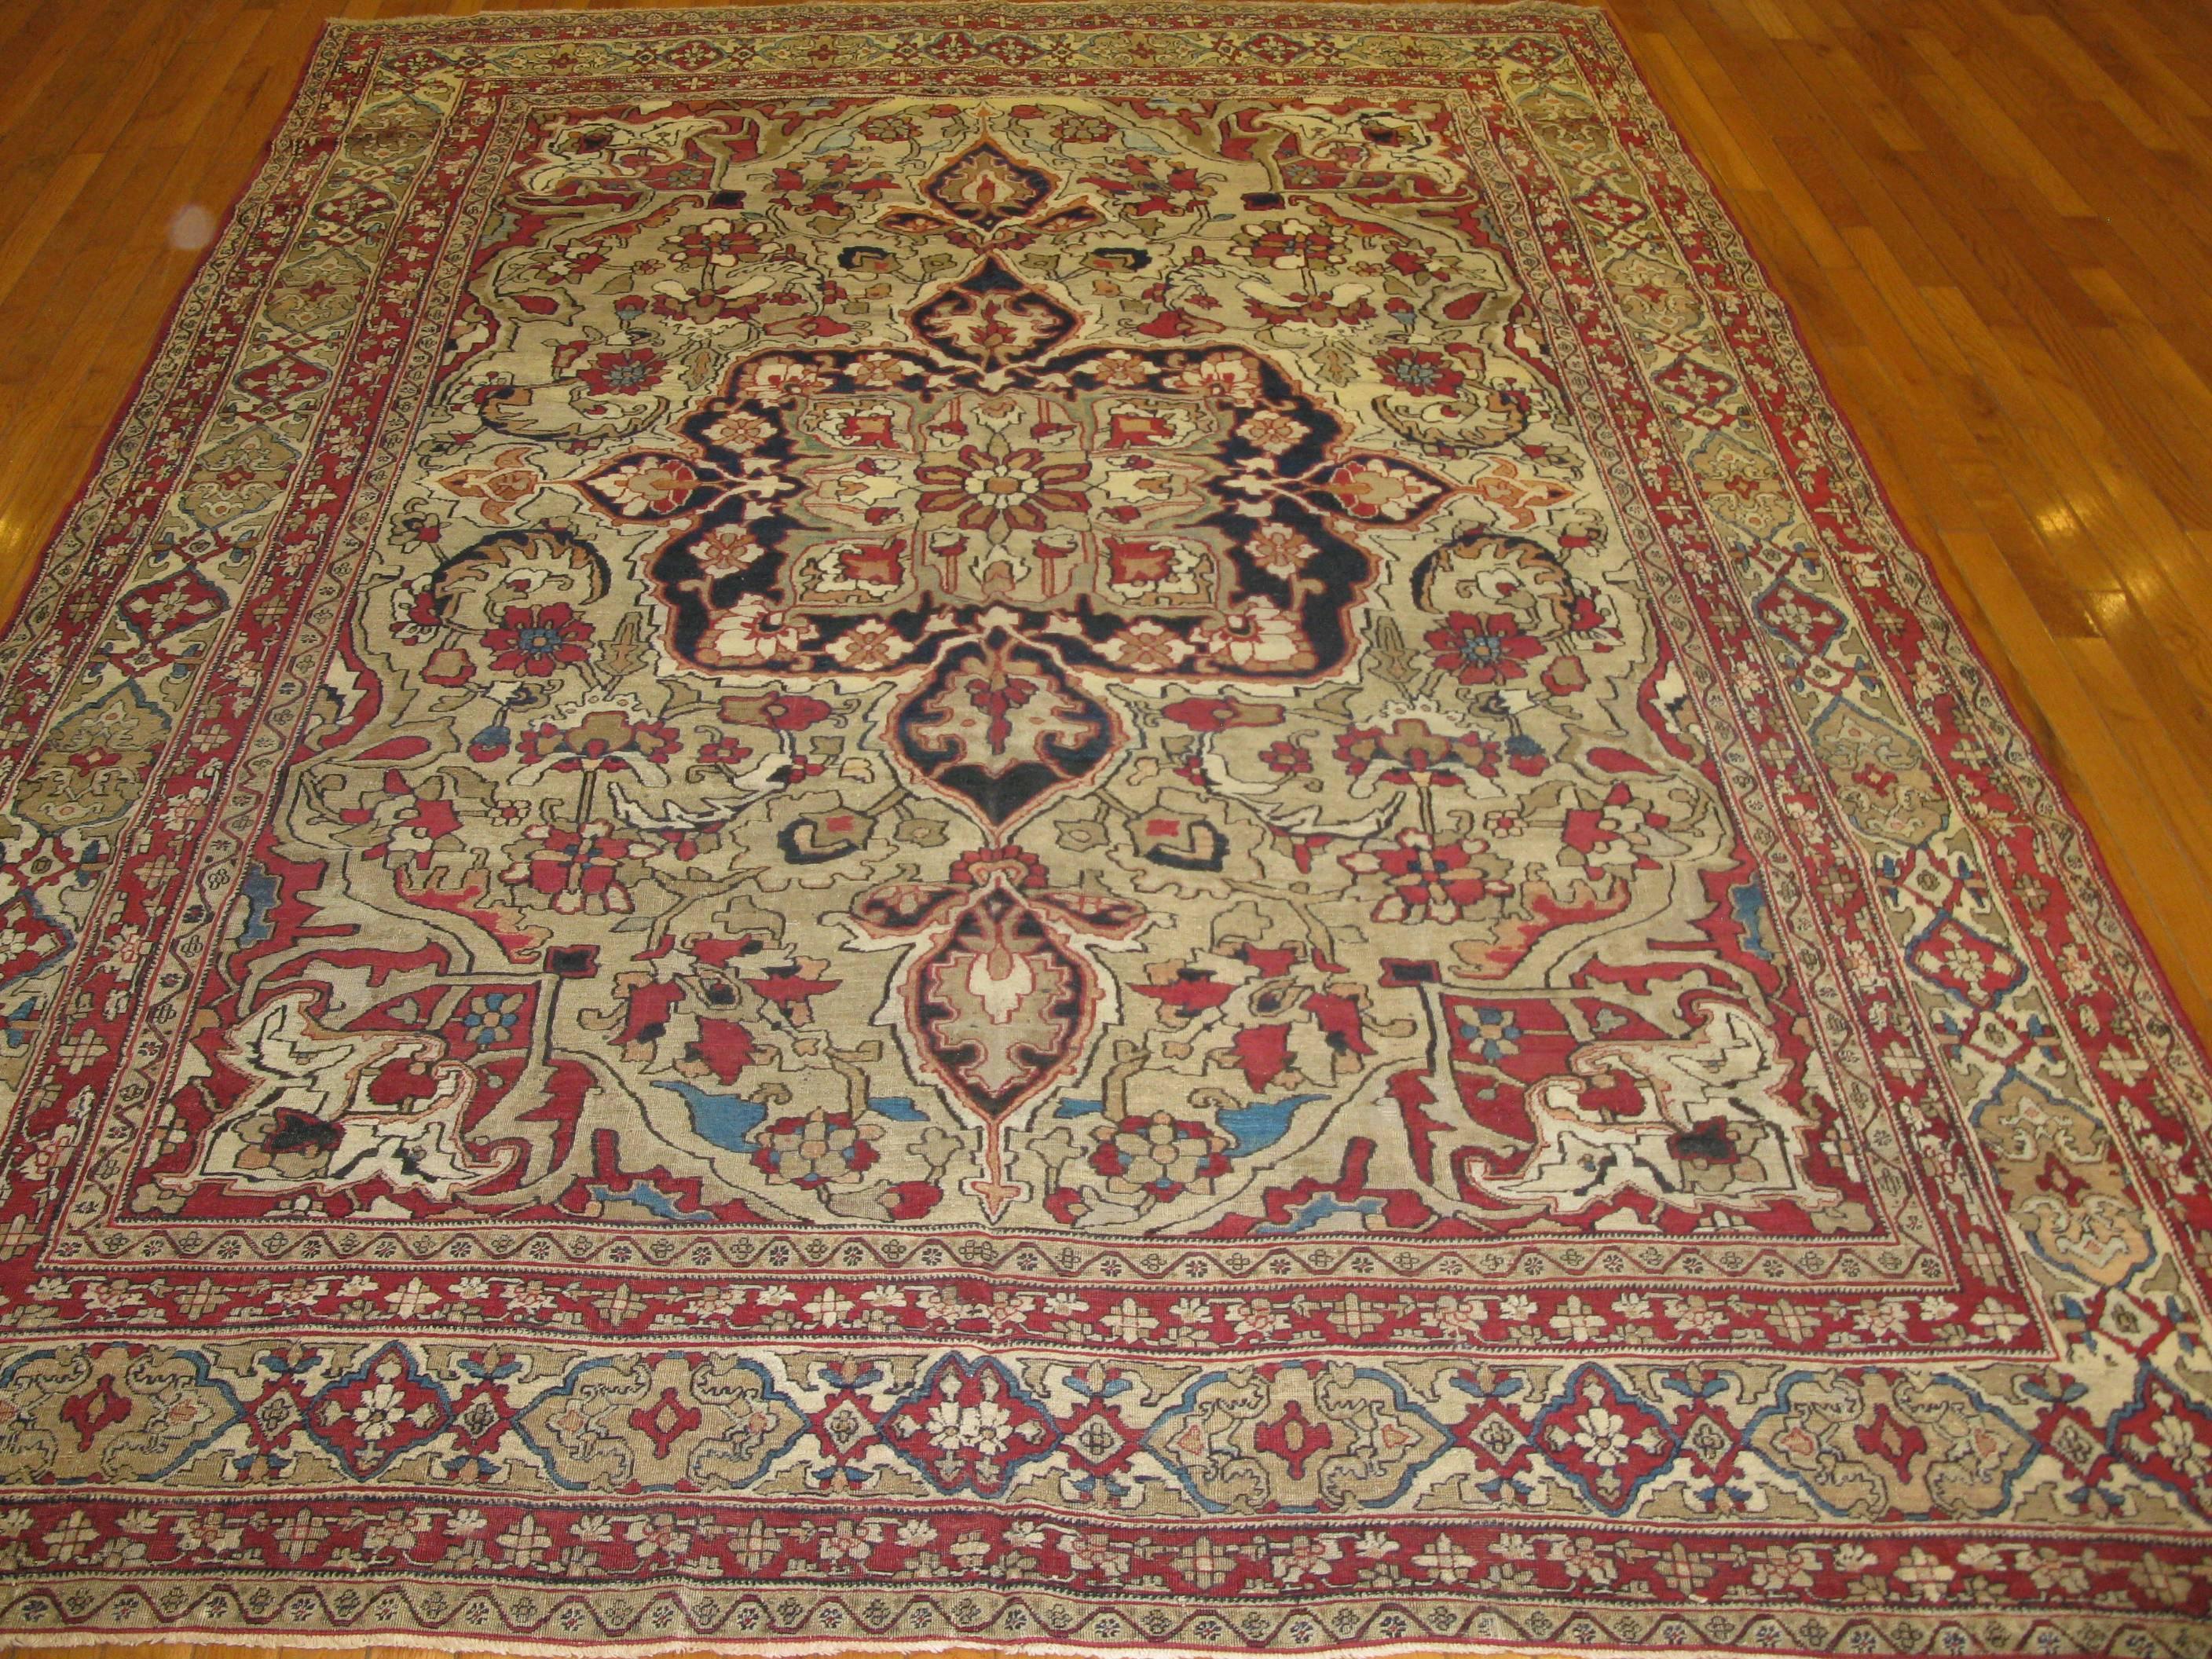 This is a beautiful and hard to find mid-size antique hand-knotted Persian Lavar Kerman rug. It has a fine weave with an intricate floral pattern on a mushroom color background. The rug measures 6' 9'' x 9' 4'' and in great condition.